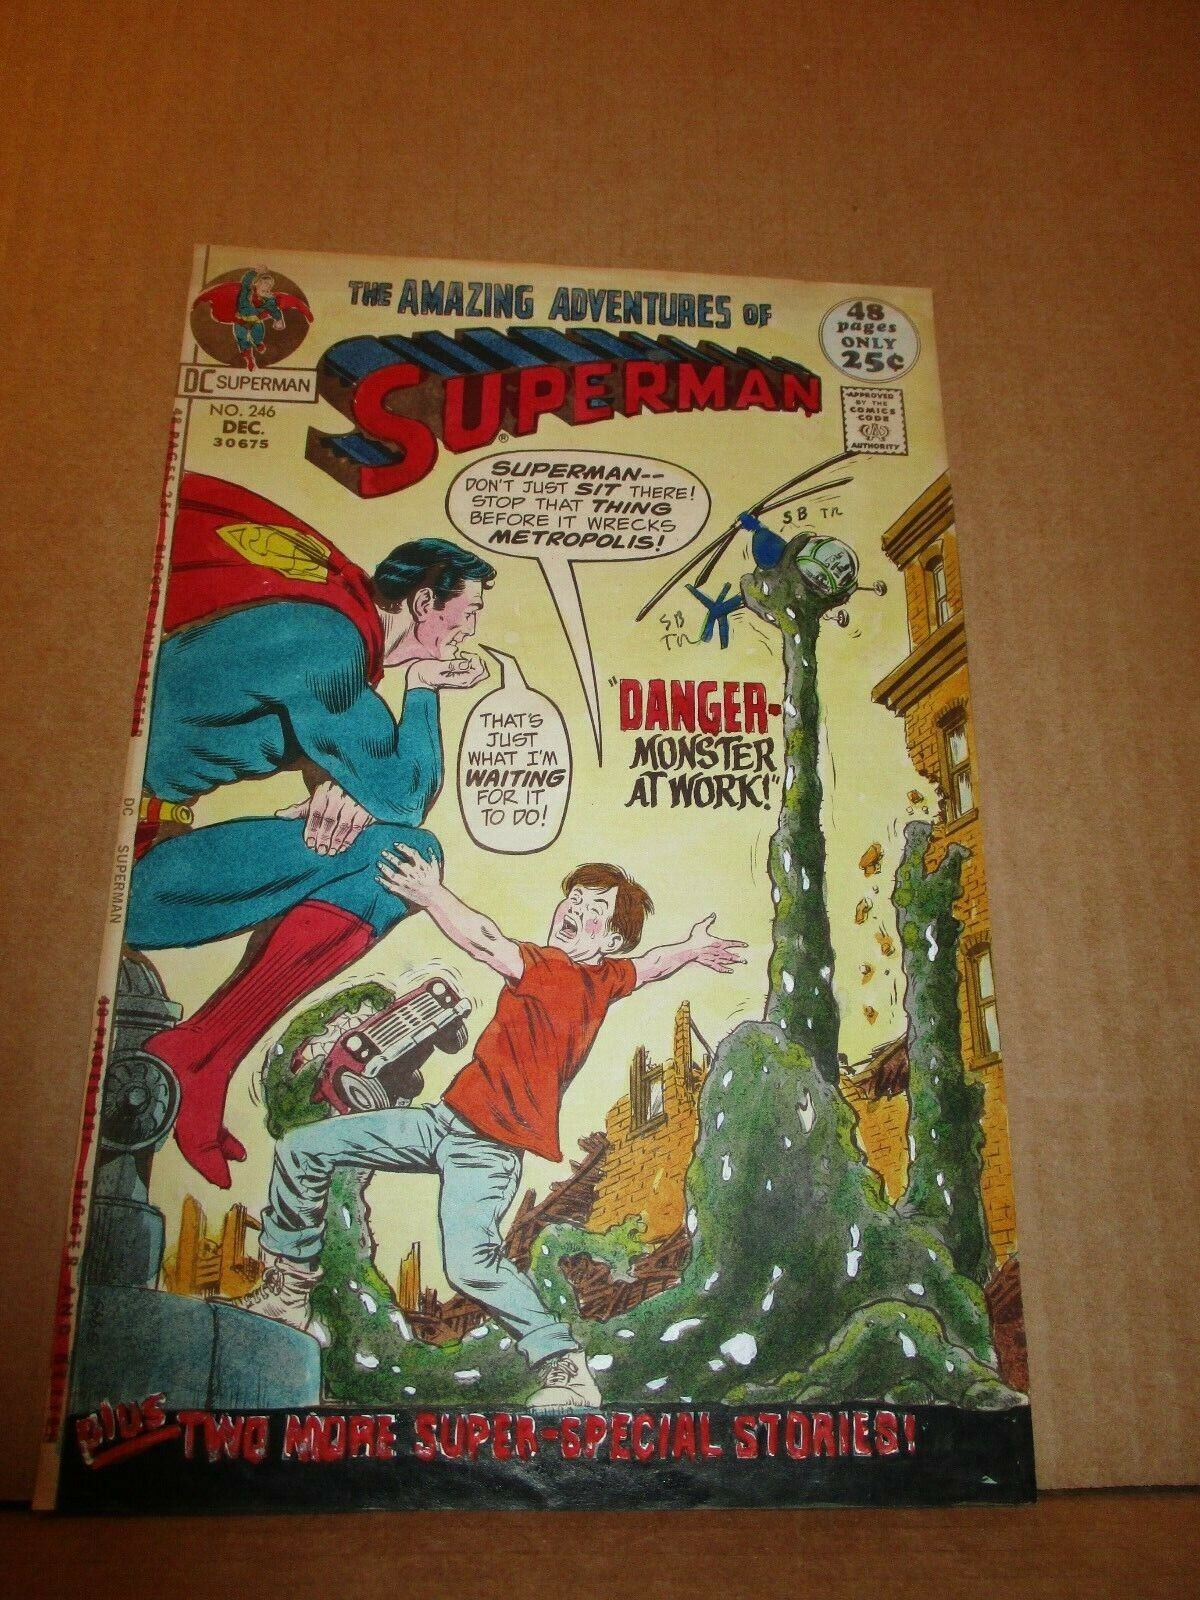 Superman 246 COVER ART HAND PAINTED COLOR GUIDE Curt Swan`71 Jack Adler Painting